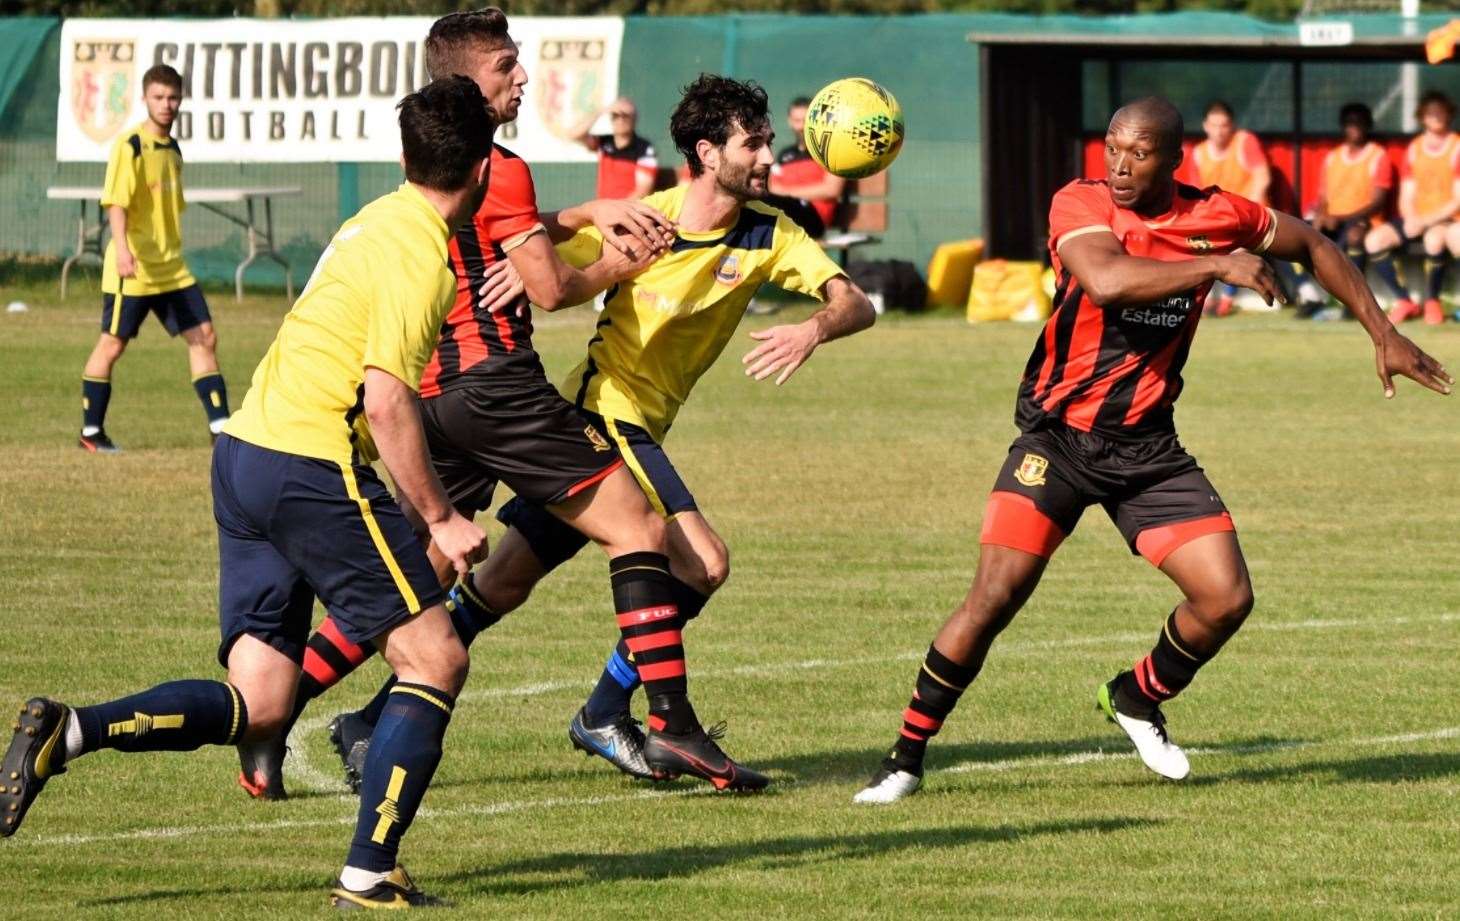 Sittingbourne aim to get ahead of Whitstable. Picture: Ken Medwyn (42331826)